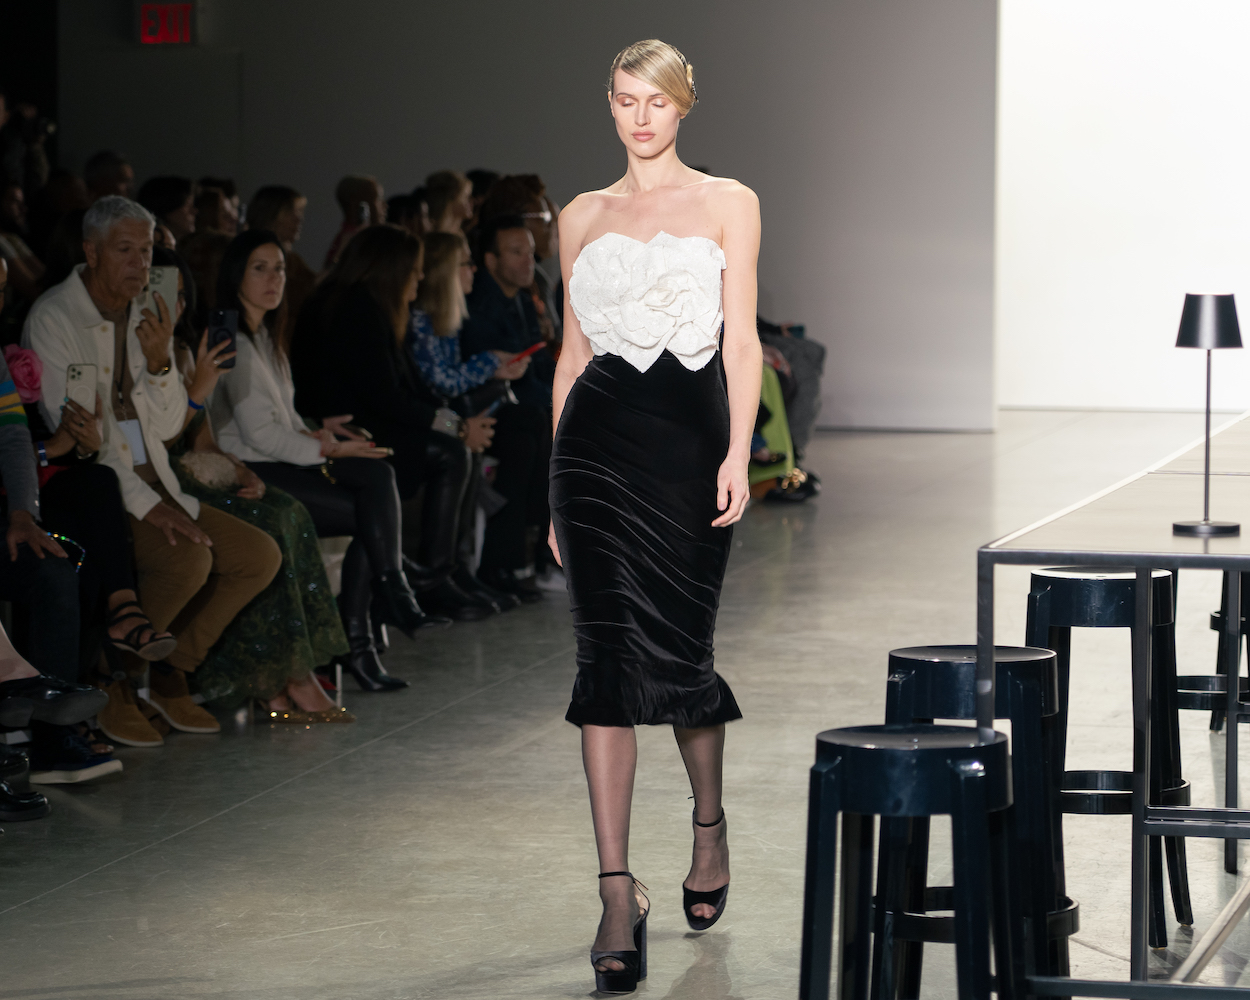 A model walking down the runway wearing a white, rose-shaped, ruffled top, a black velvet skirt and black heels.